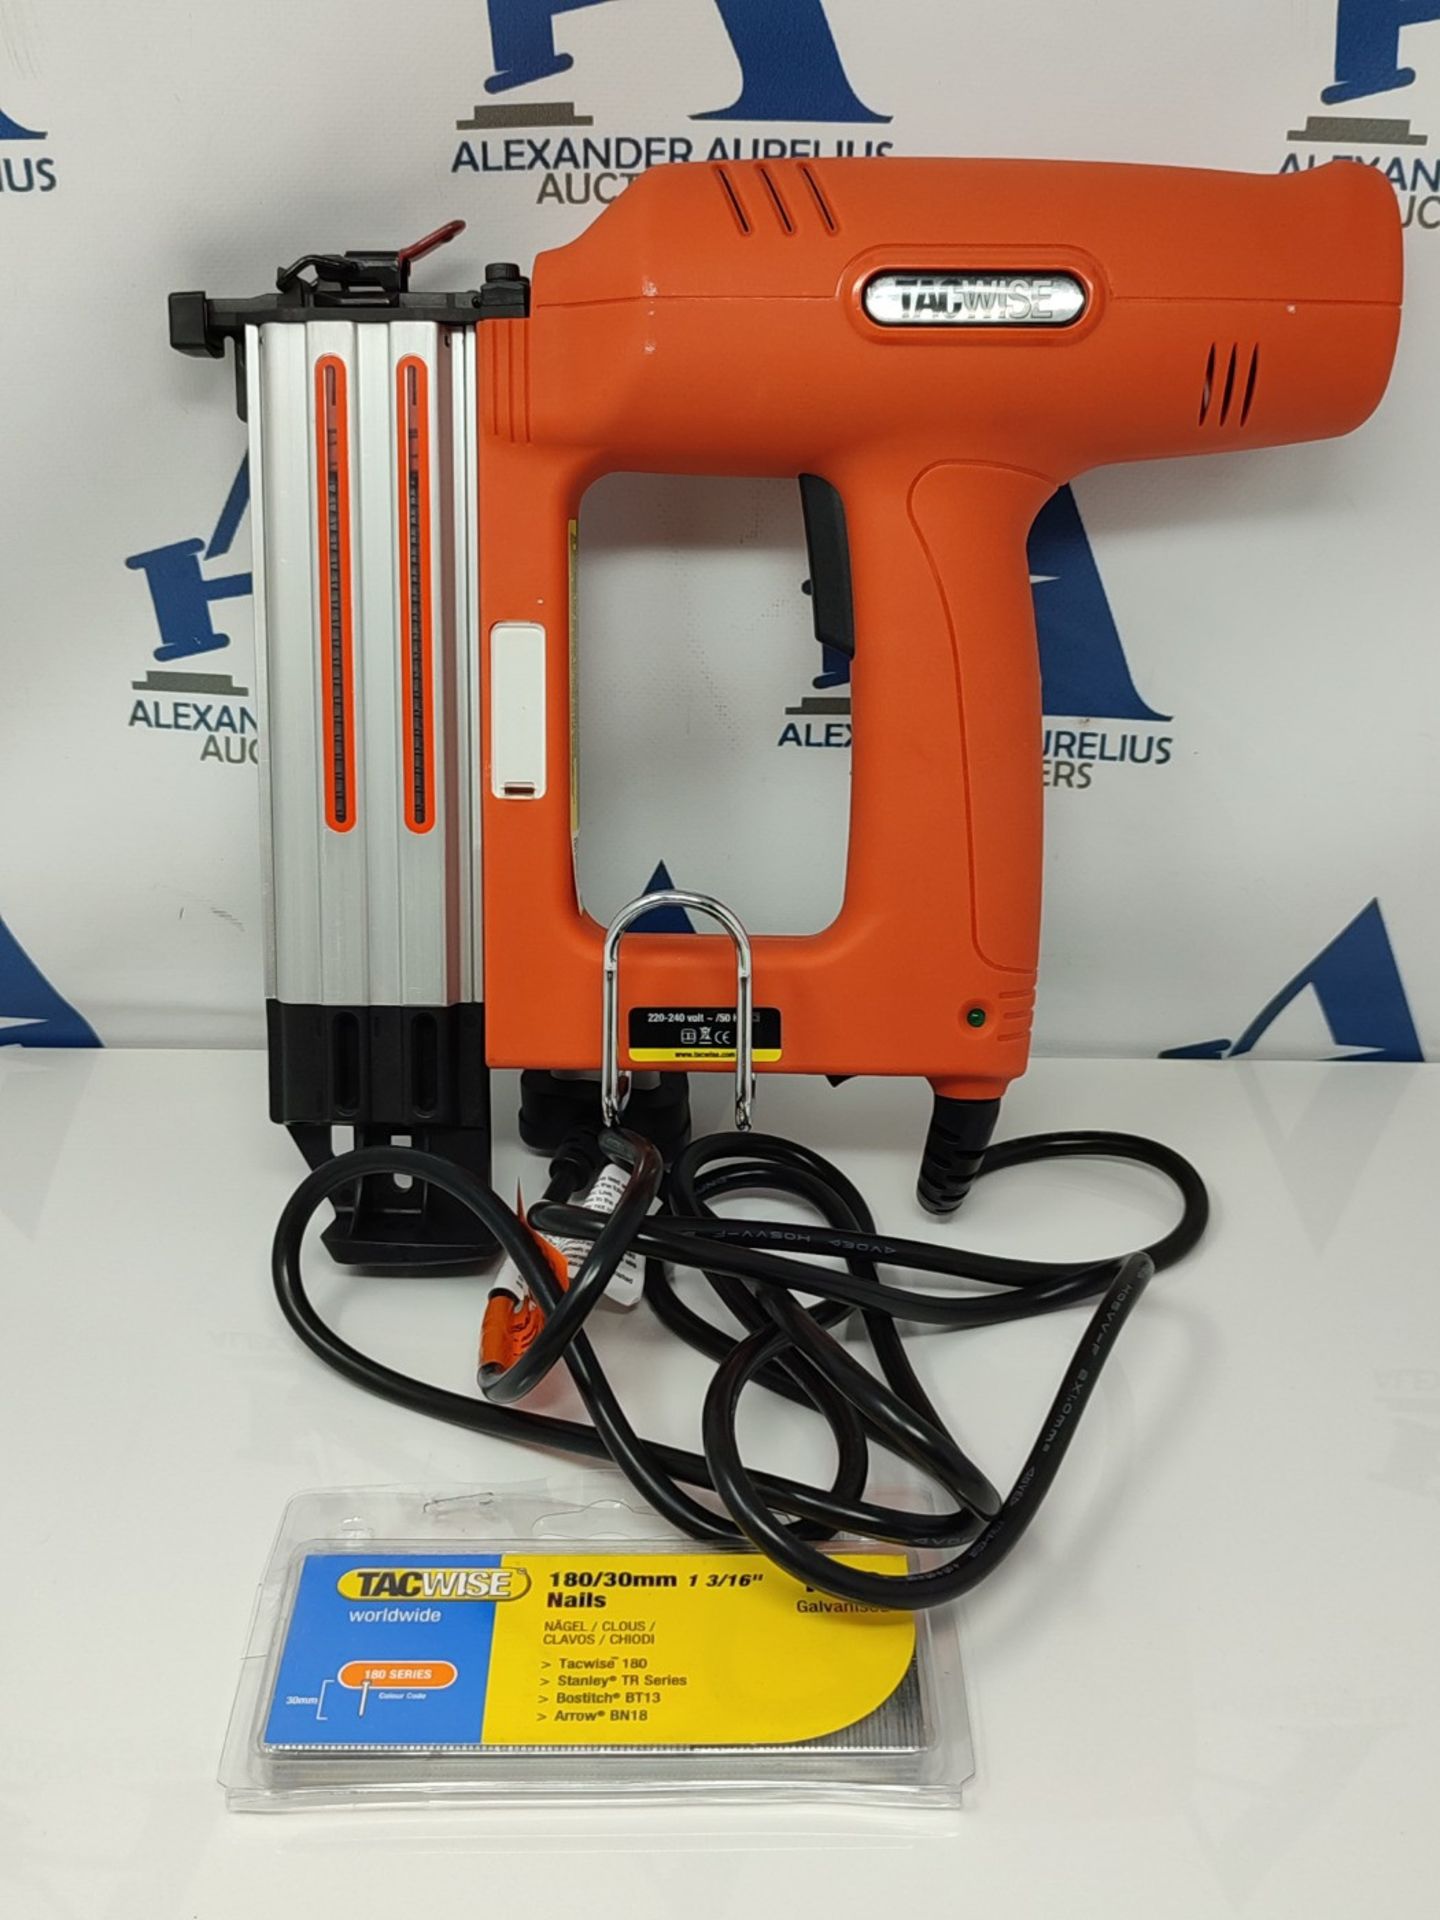 RRP £139.00 Tacwise 1707 Master Nailer 18G/50, Electric Brad Nail Gun with 1,000 Nails, Uses Type - Image 3 of 3